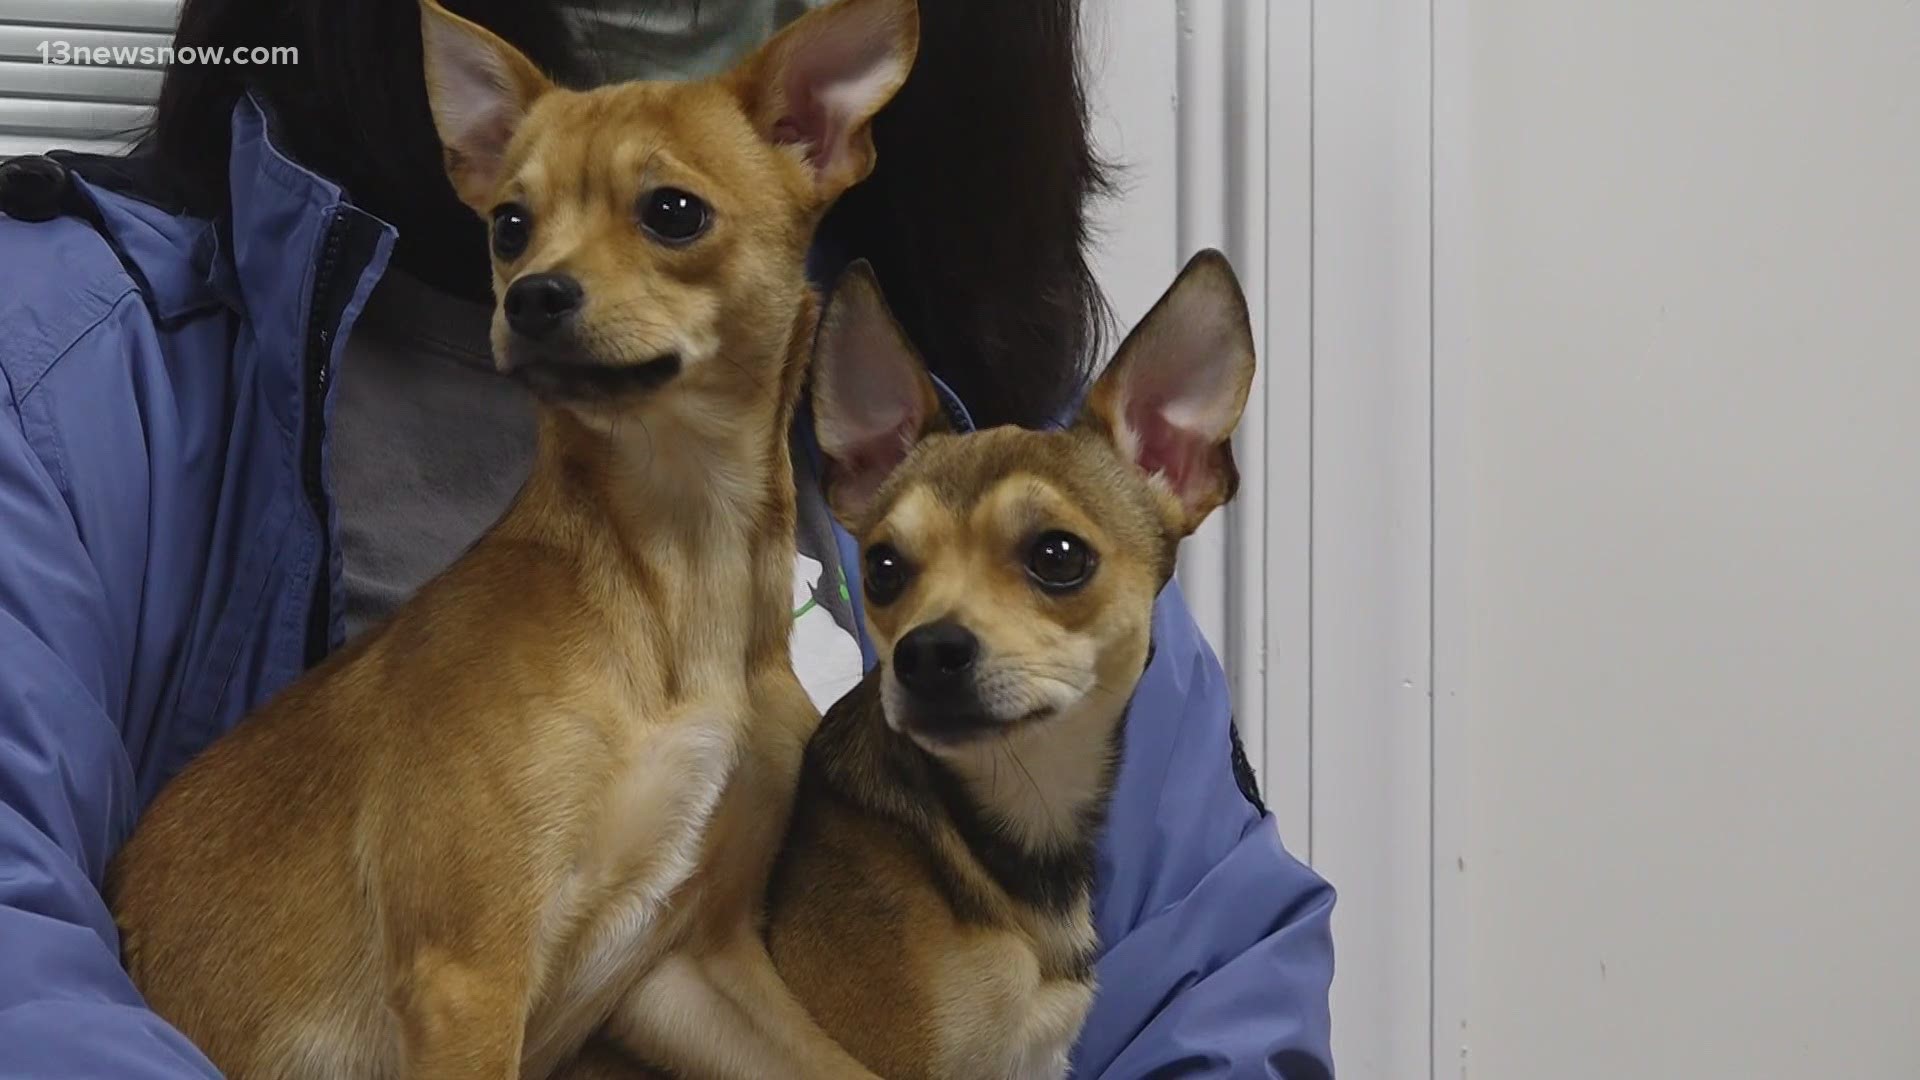 Goldie and Kurt are inseparable and that makes finding a home even harder. The Chesapeake Humane Society is trying to find the pair a forever home.